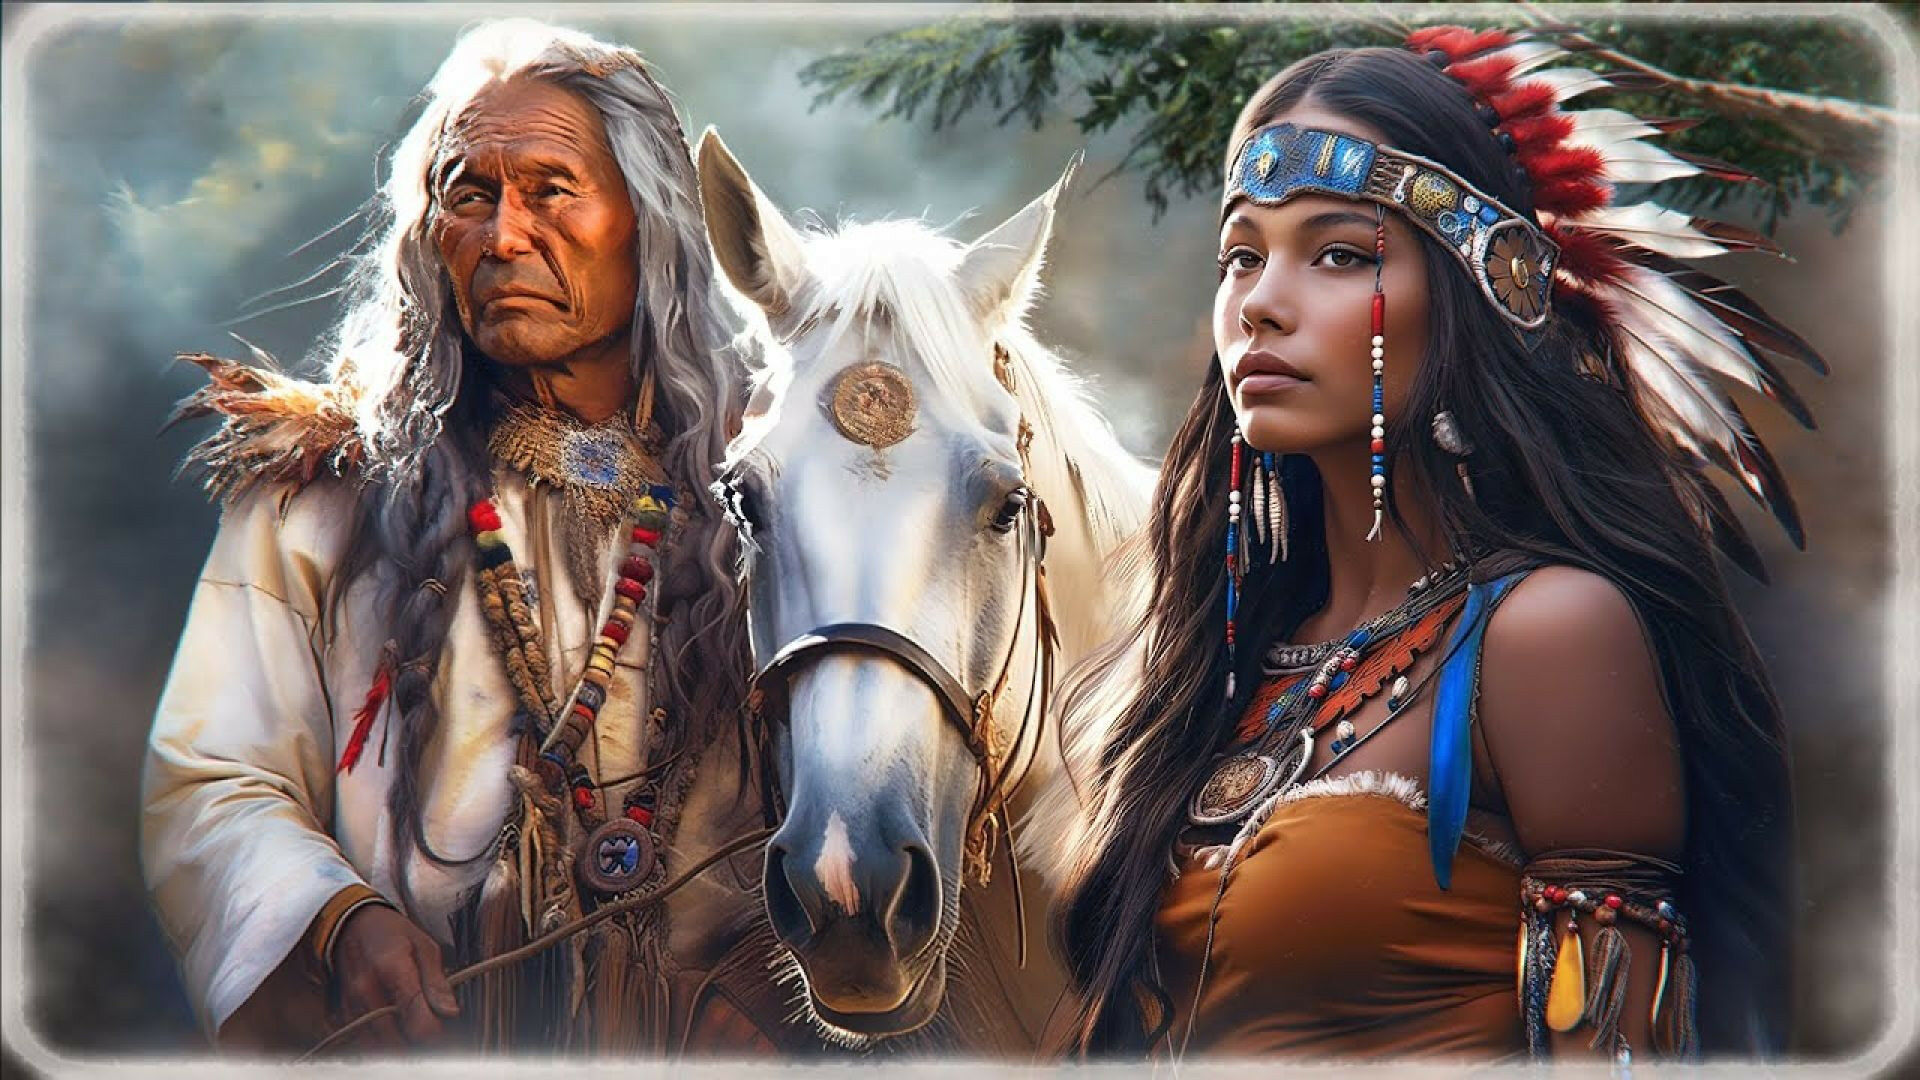 Heal Your Soul Music Of The Great Spirit - Native American Peaceful Music